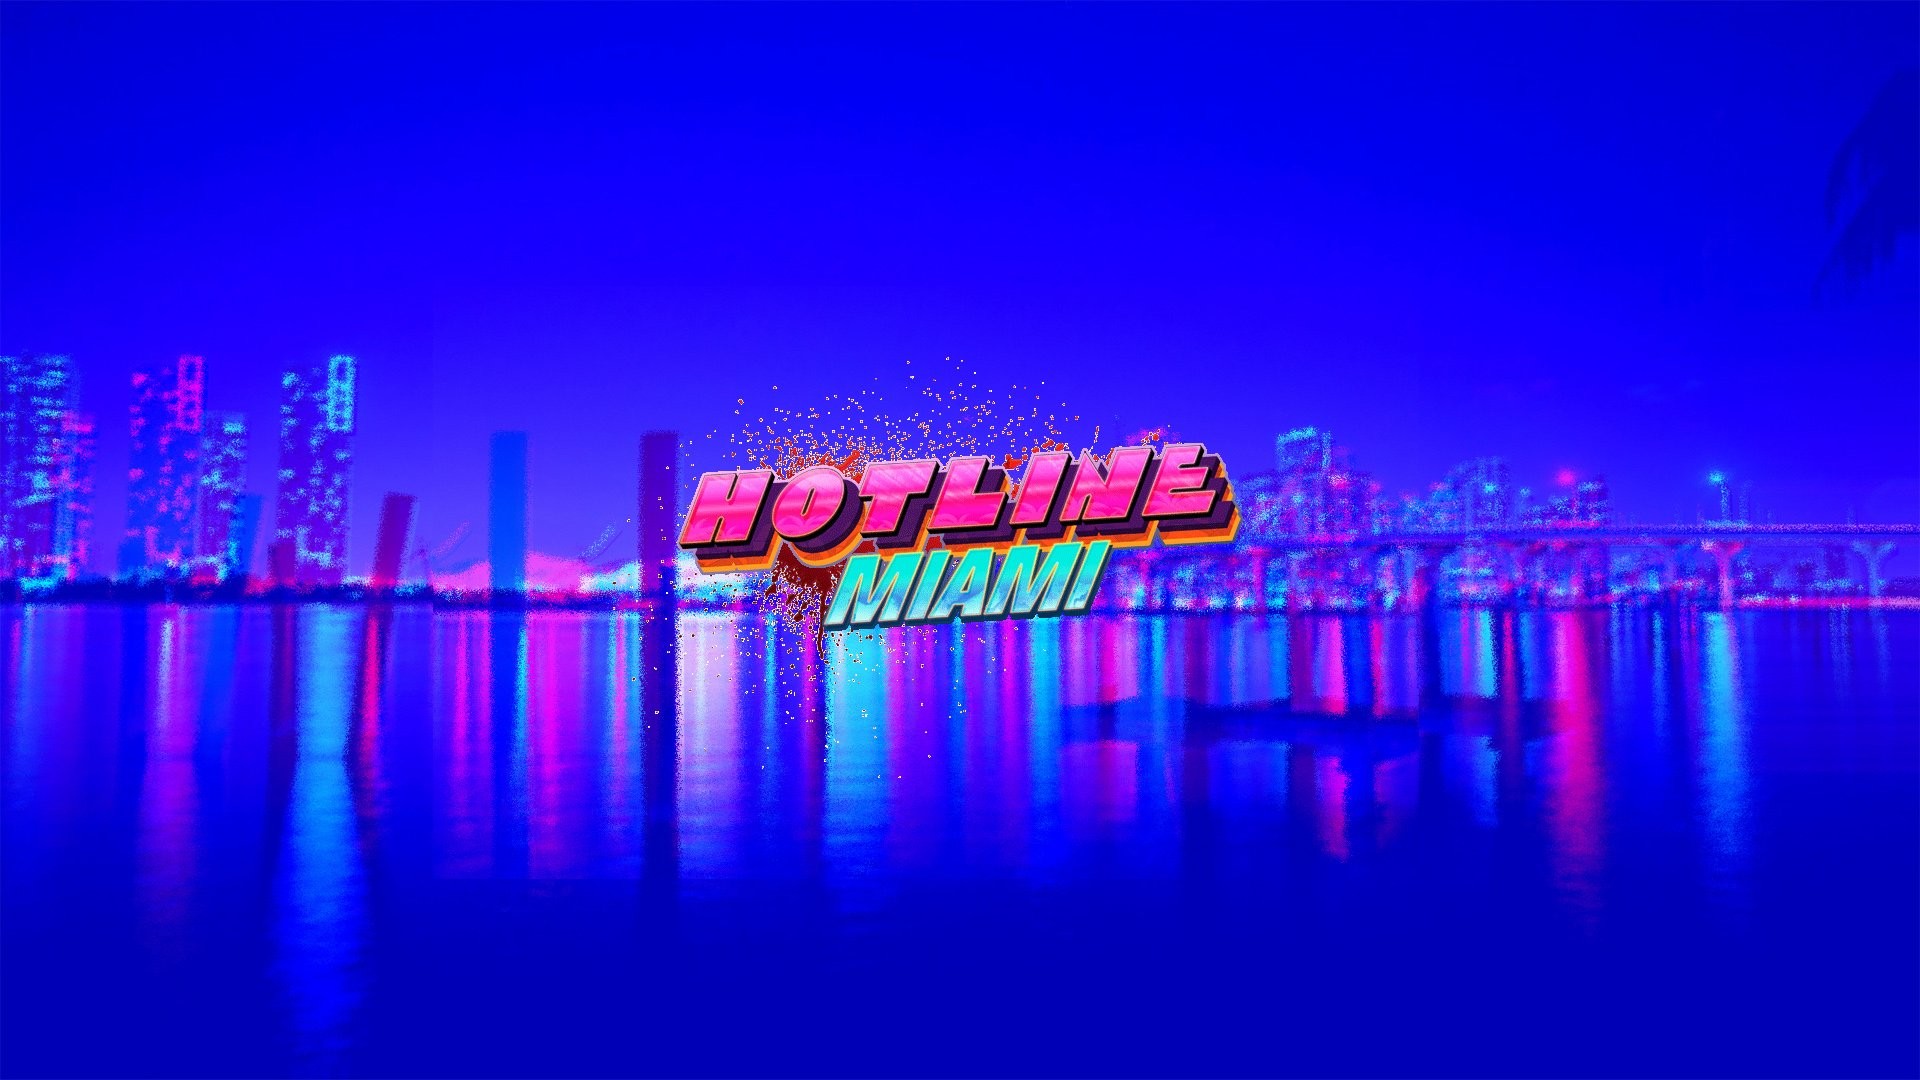 HOTLINE MIAMI action shooter fighting hotline miami payday wallpaper